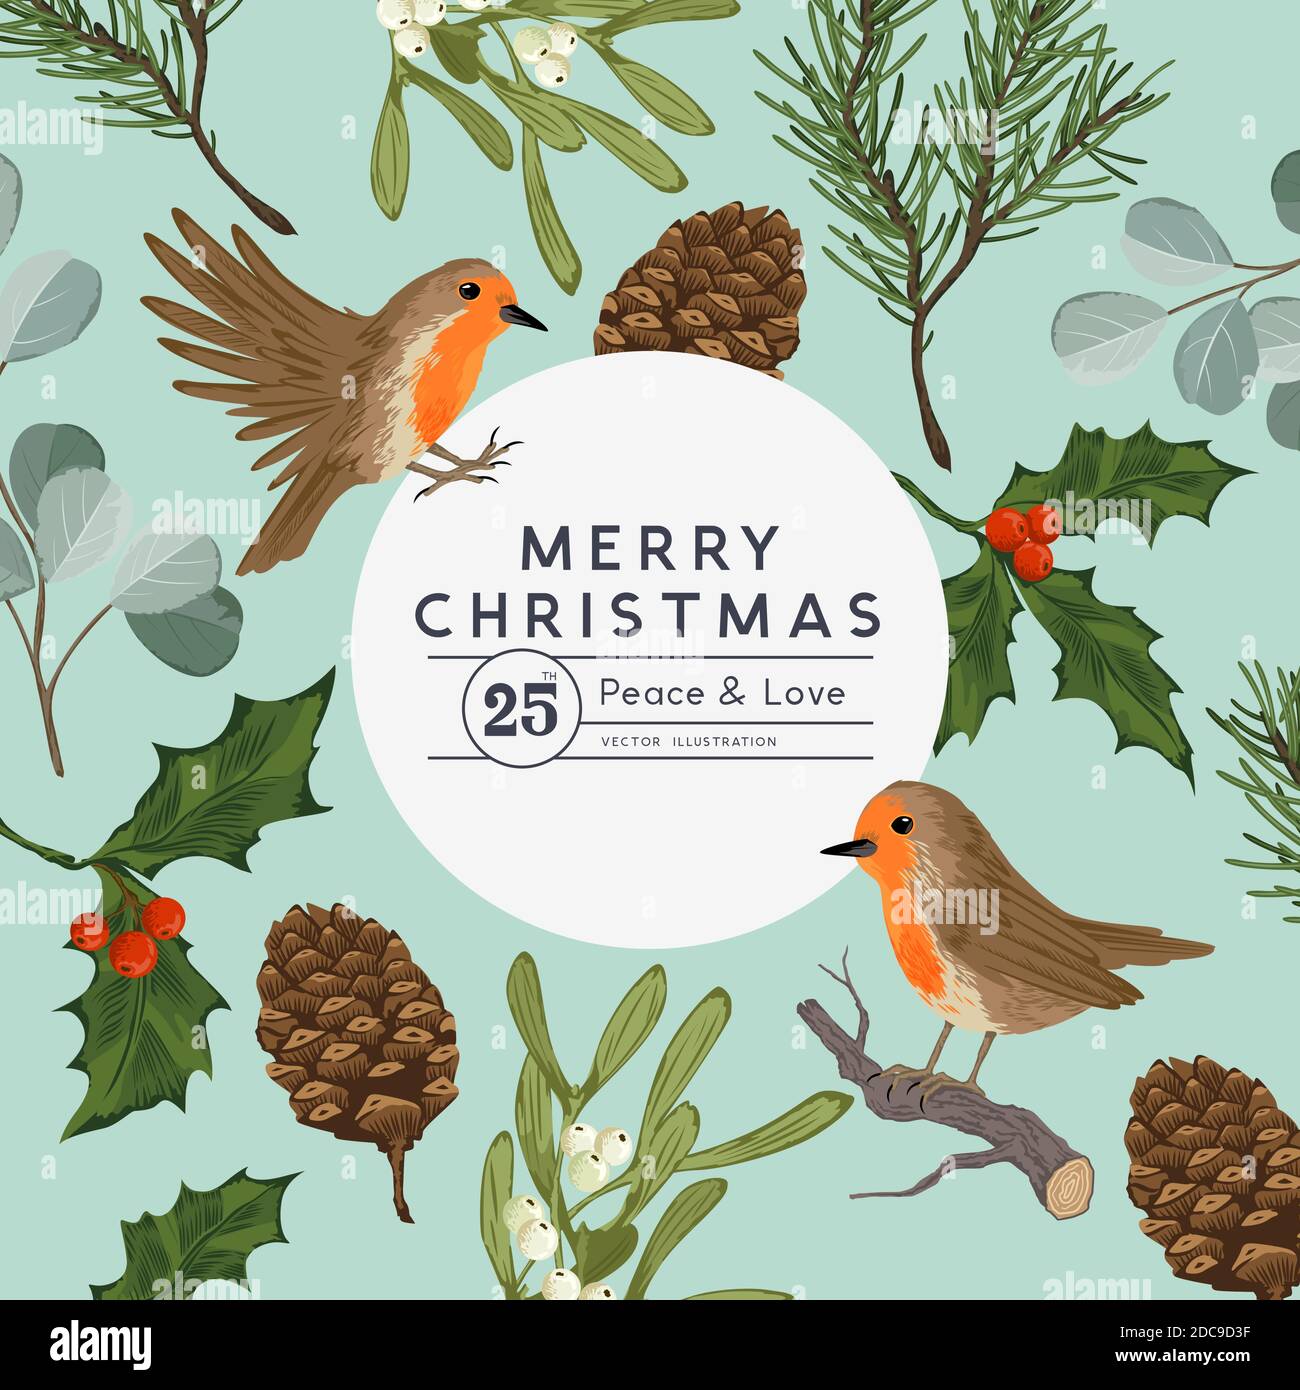 Vintage floral christmas layout desing with robin birds and seasonal plants including mistletoe and pine. Vector illustration. Stock Vector